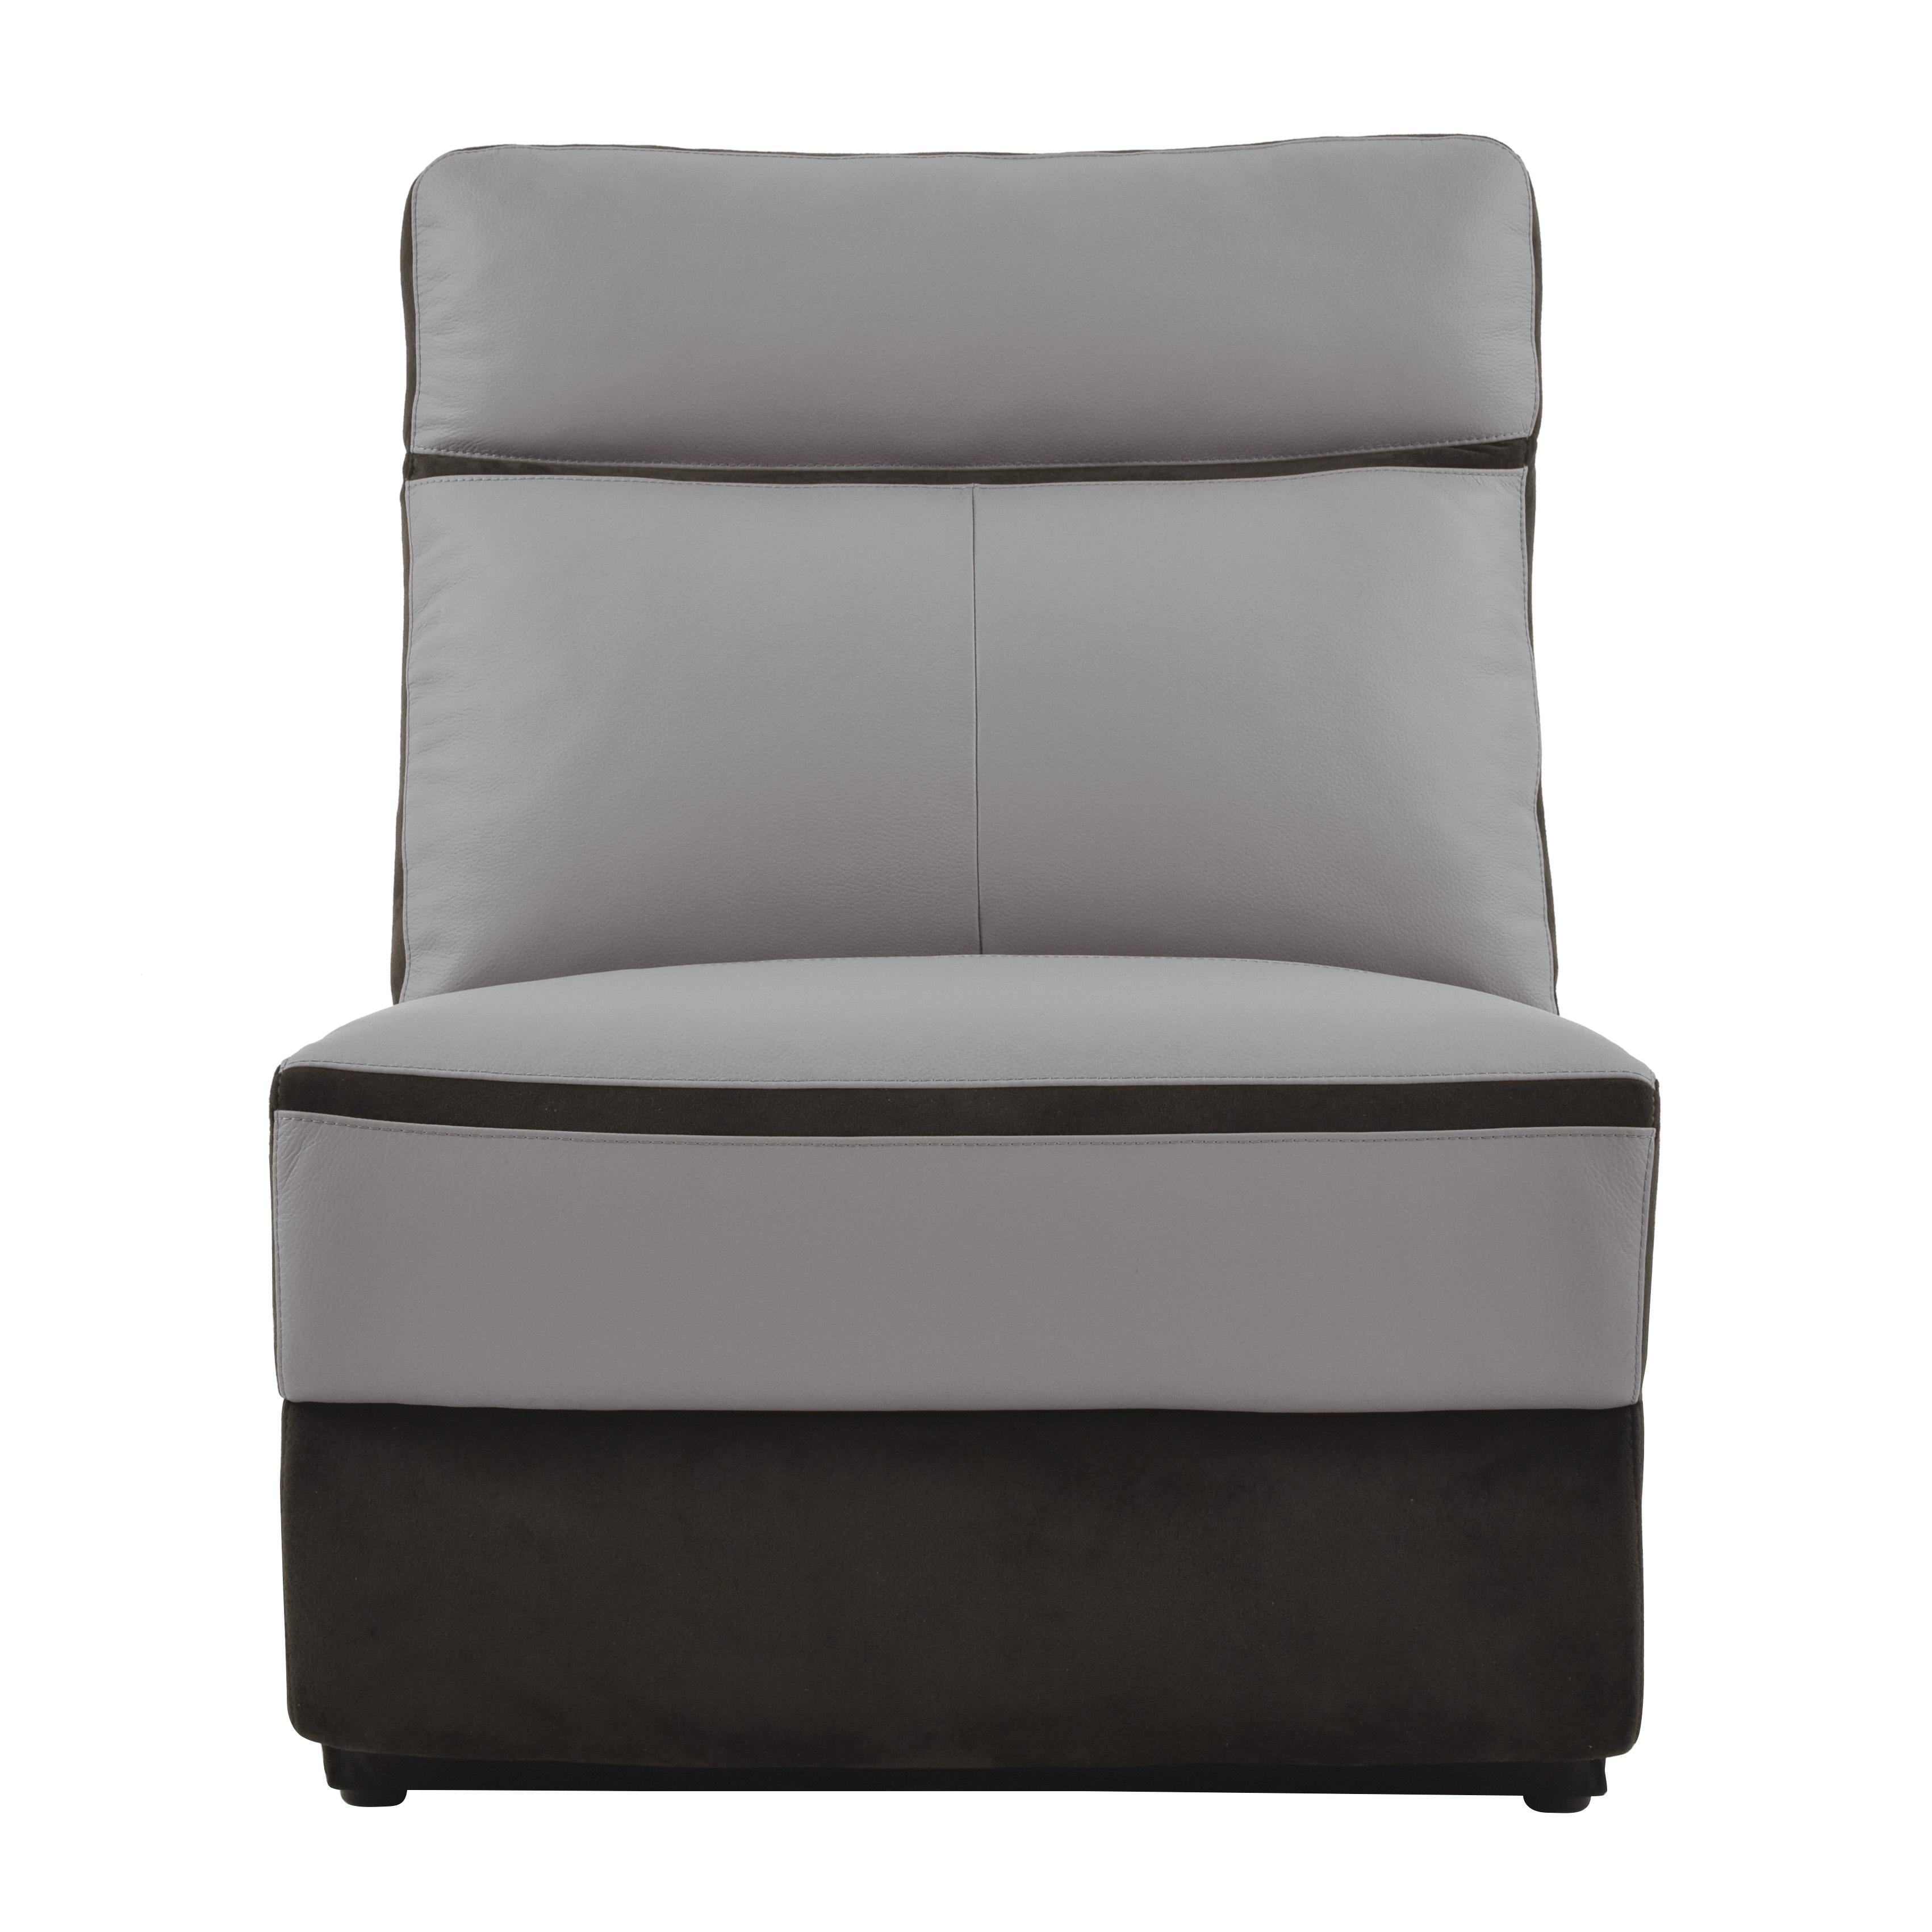 Modern Armless Chair 8318-AC Laertes 8318-AC in Charcoal Top grain leather